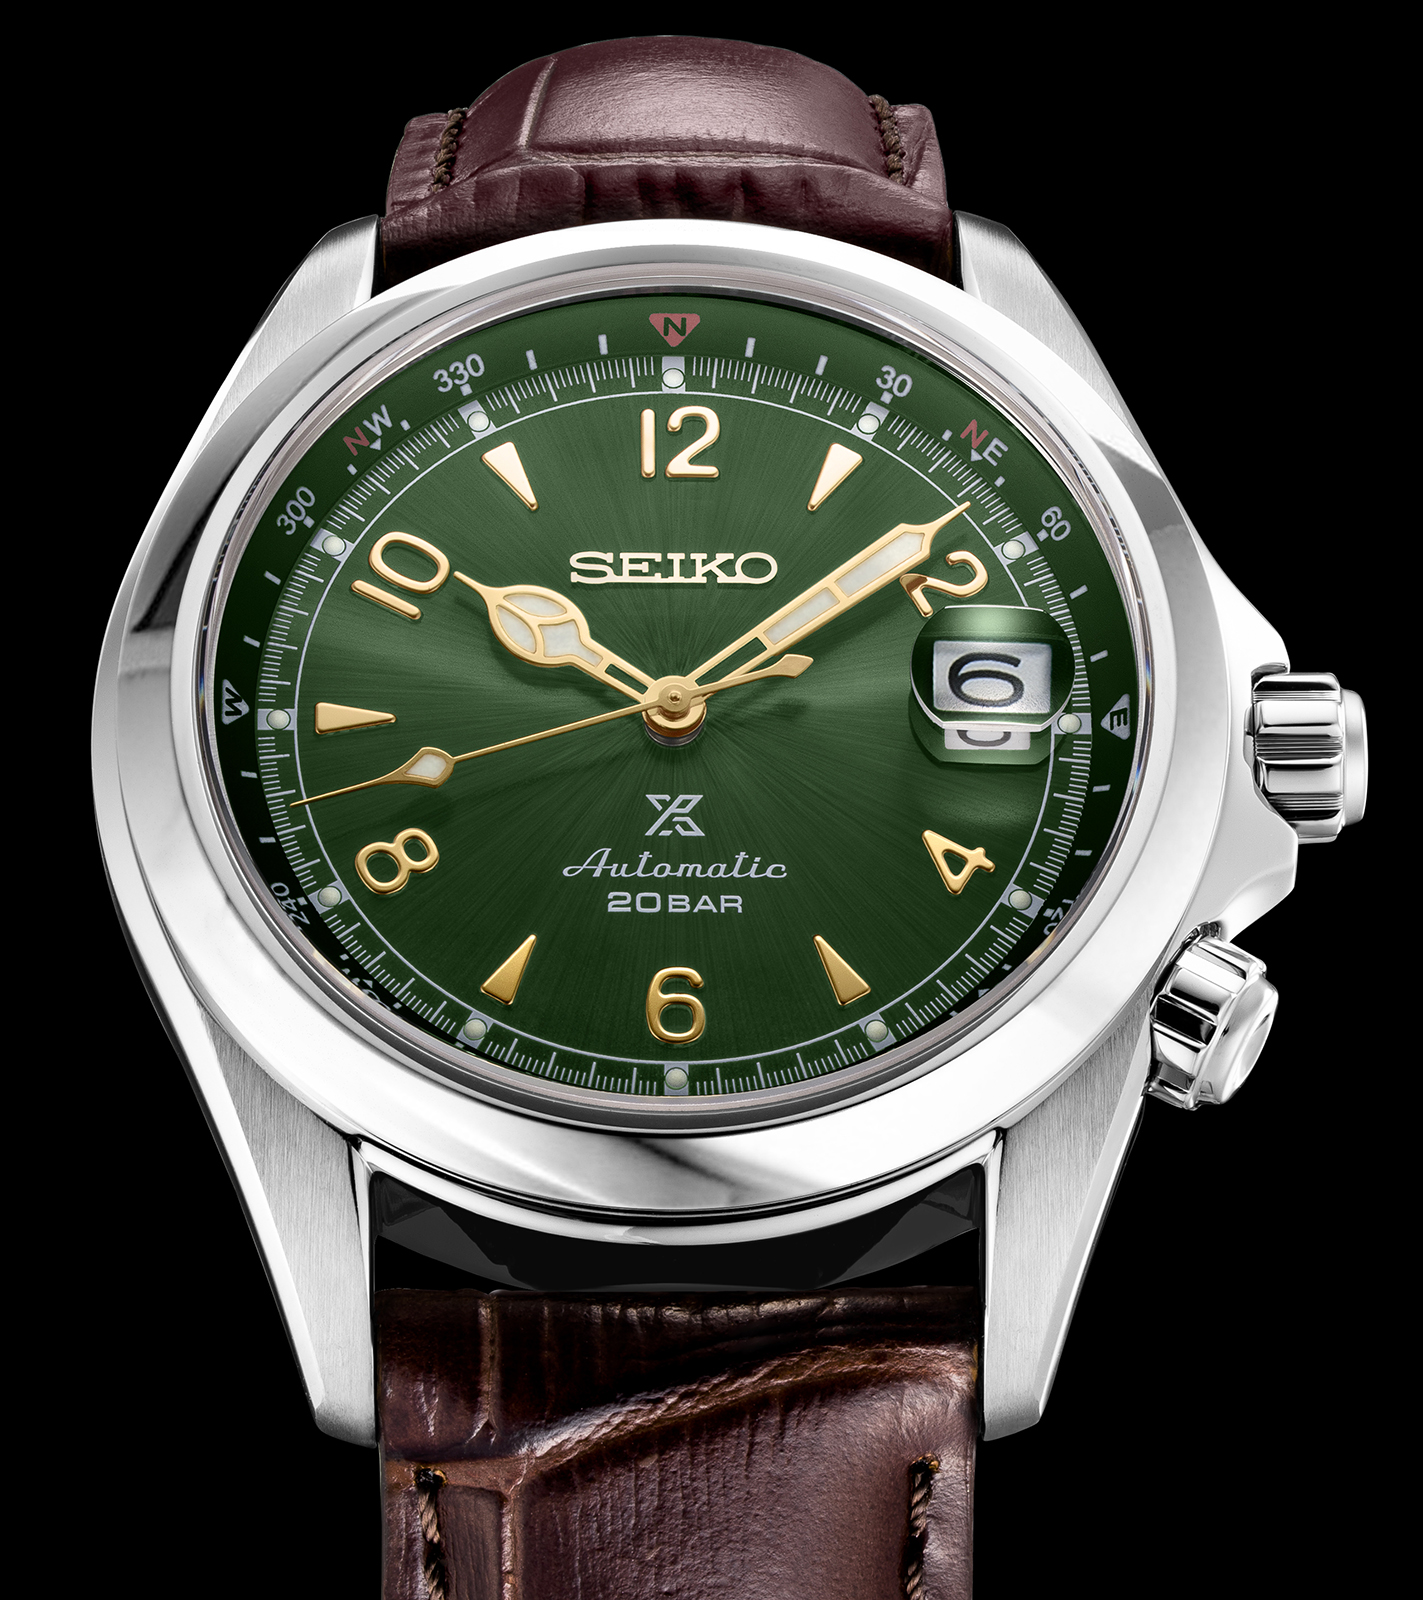 Seiko Adds Four New Alpinist Inspired Watches To Prospex Line For